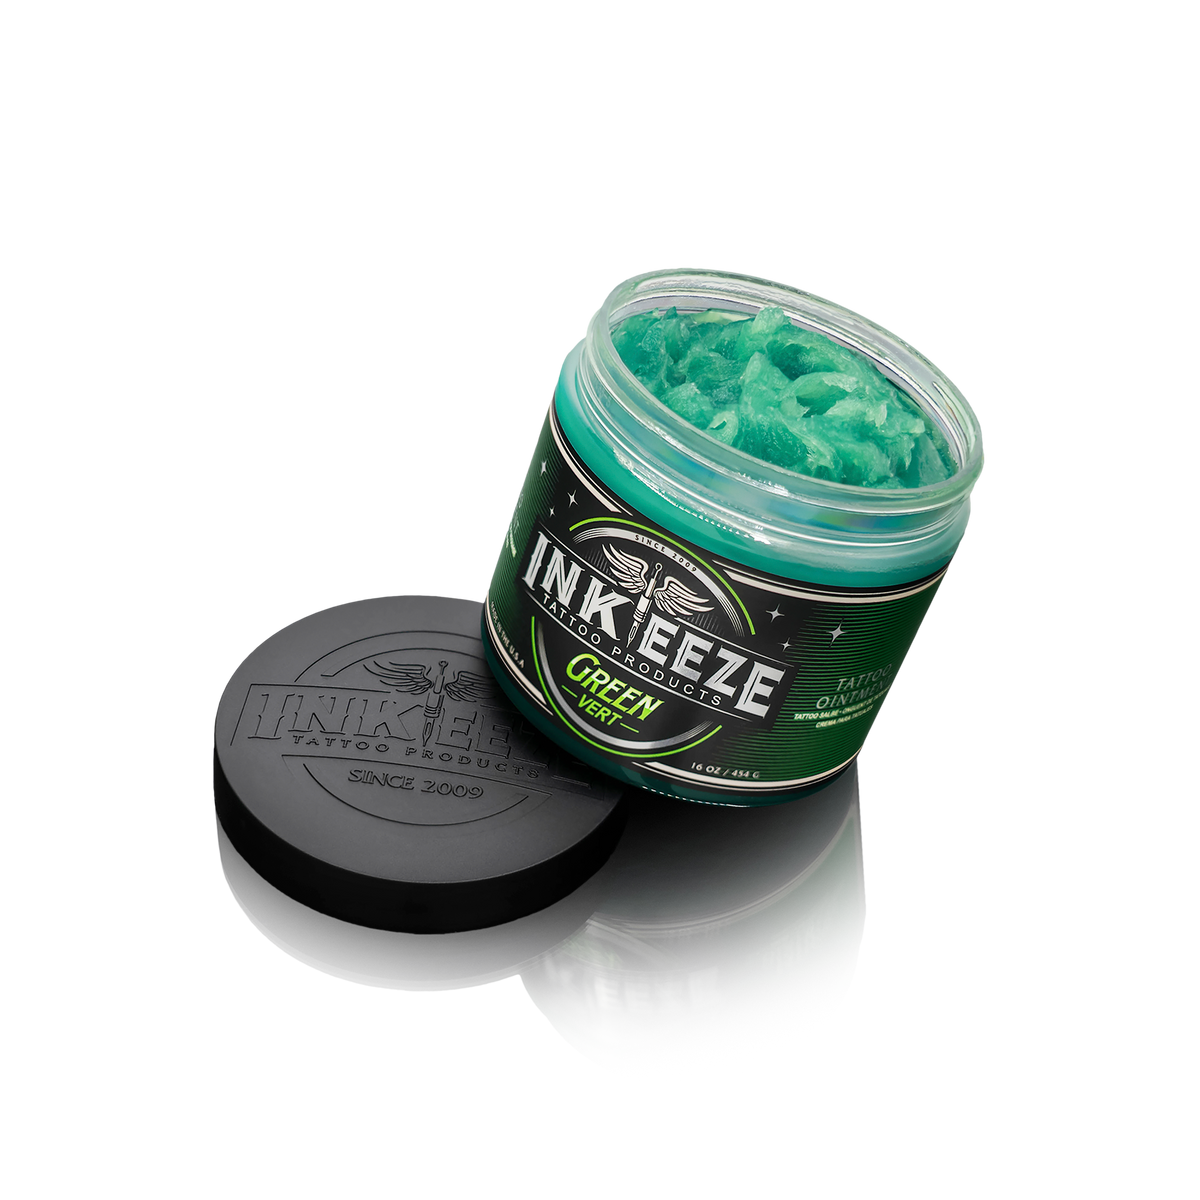 INK-EEZE Green Glide Tattoo Ointment